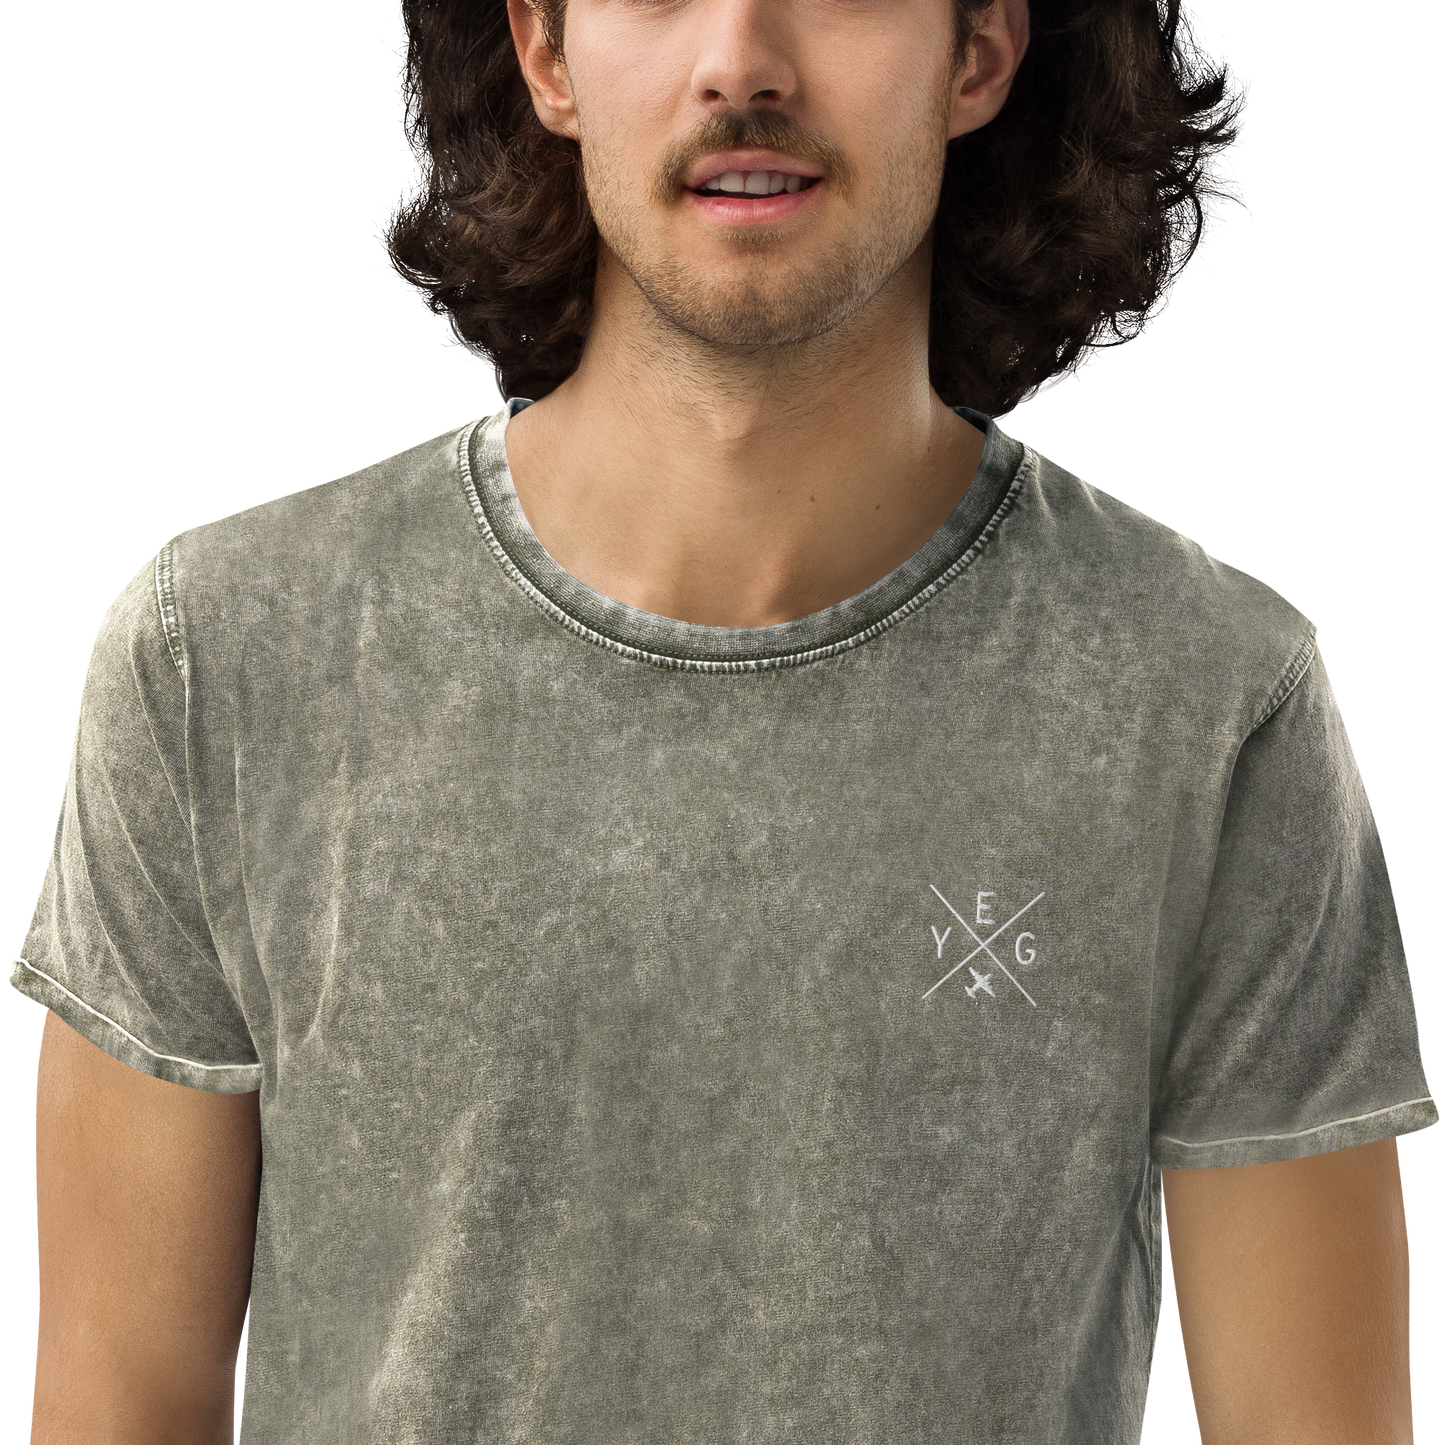 YHM Designs - YEG Edmonton Denim T-Shirt - Crossed-X Design with Airport Code and Vintage Propliner - White Embroidery - Image 11